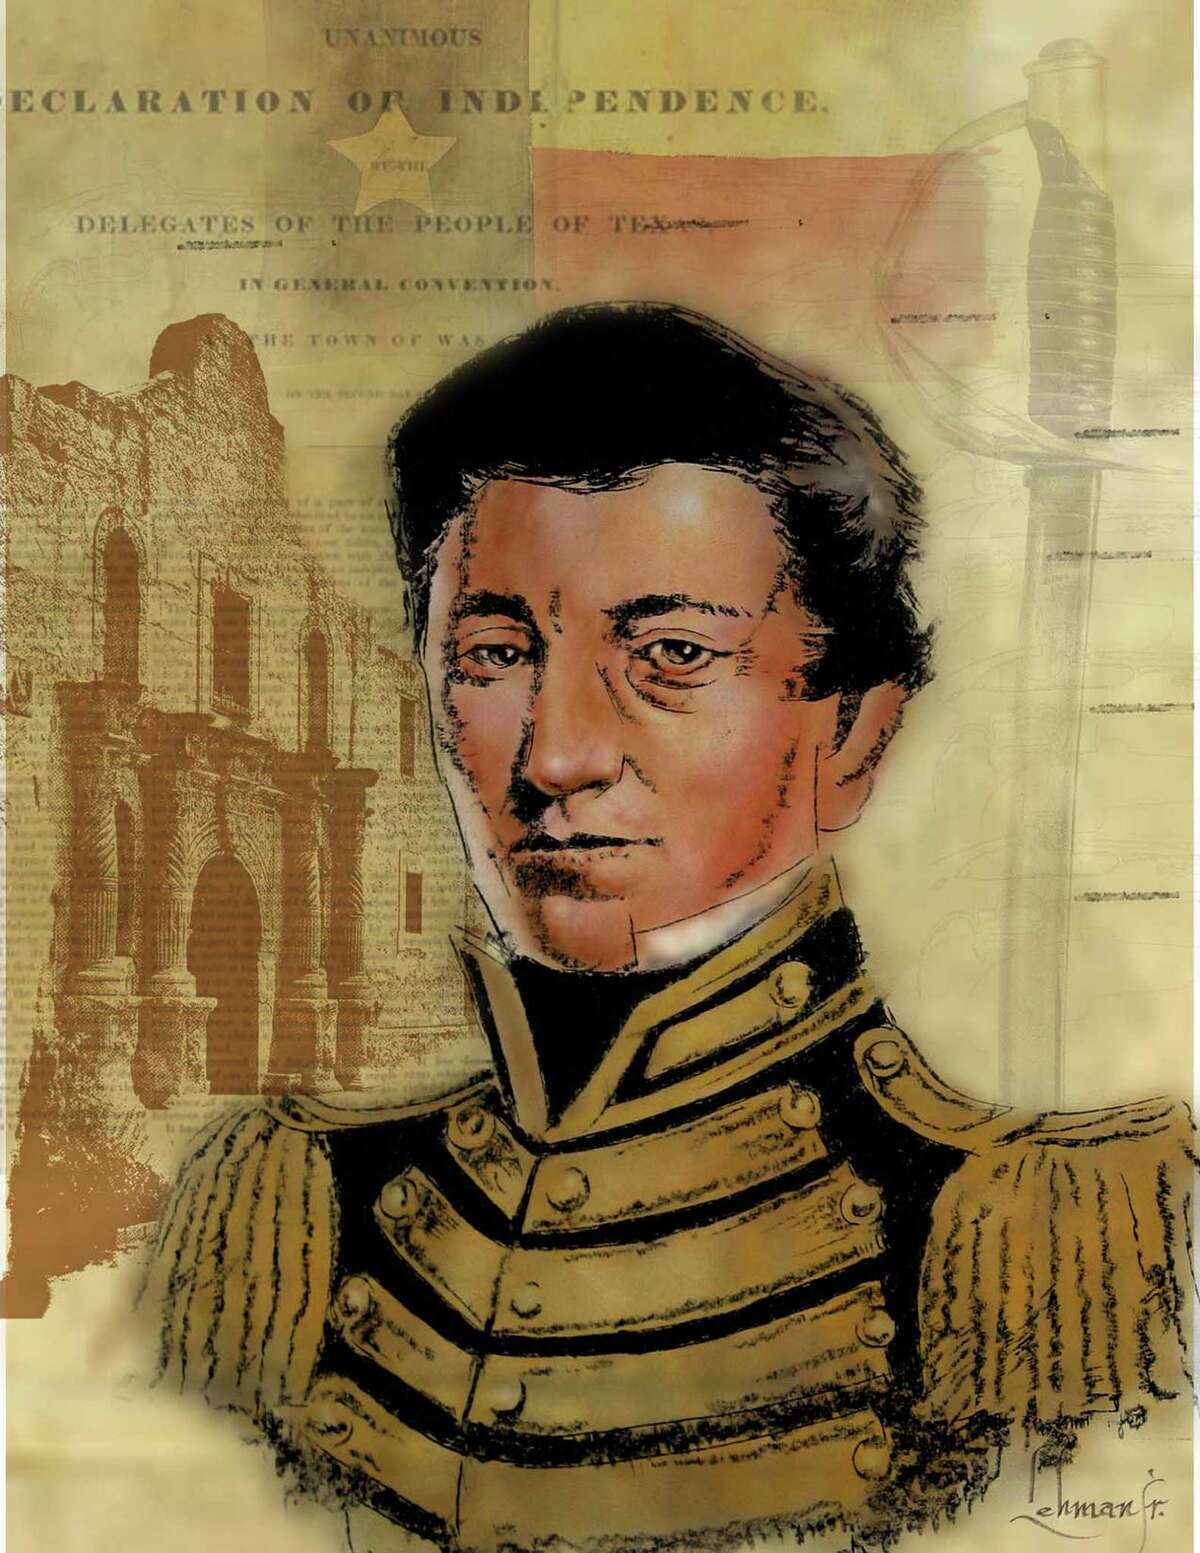 A third-generation Tejano, Juan Seguin survived the attack on the Alamo by leaving on a 'suicide mission' to seek reinforcements.